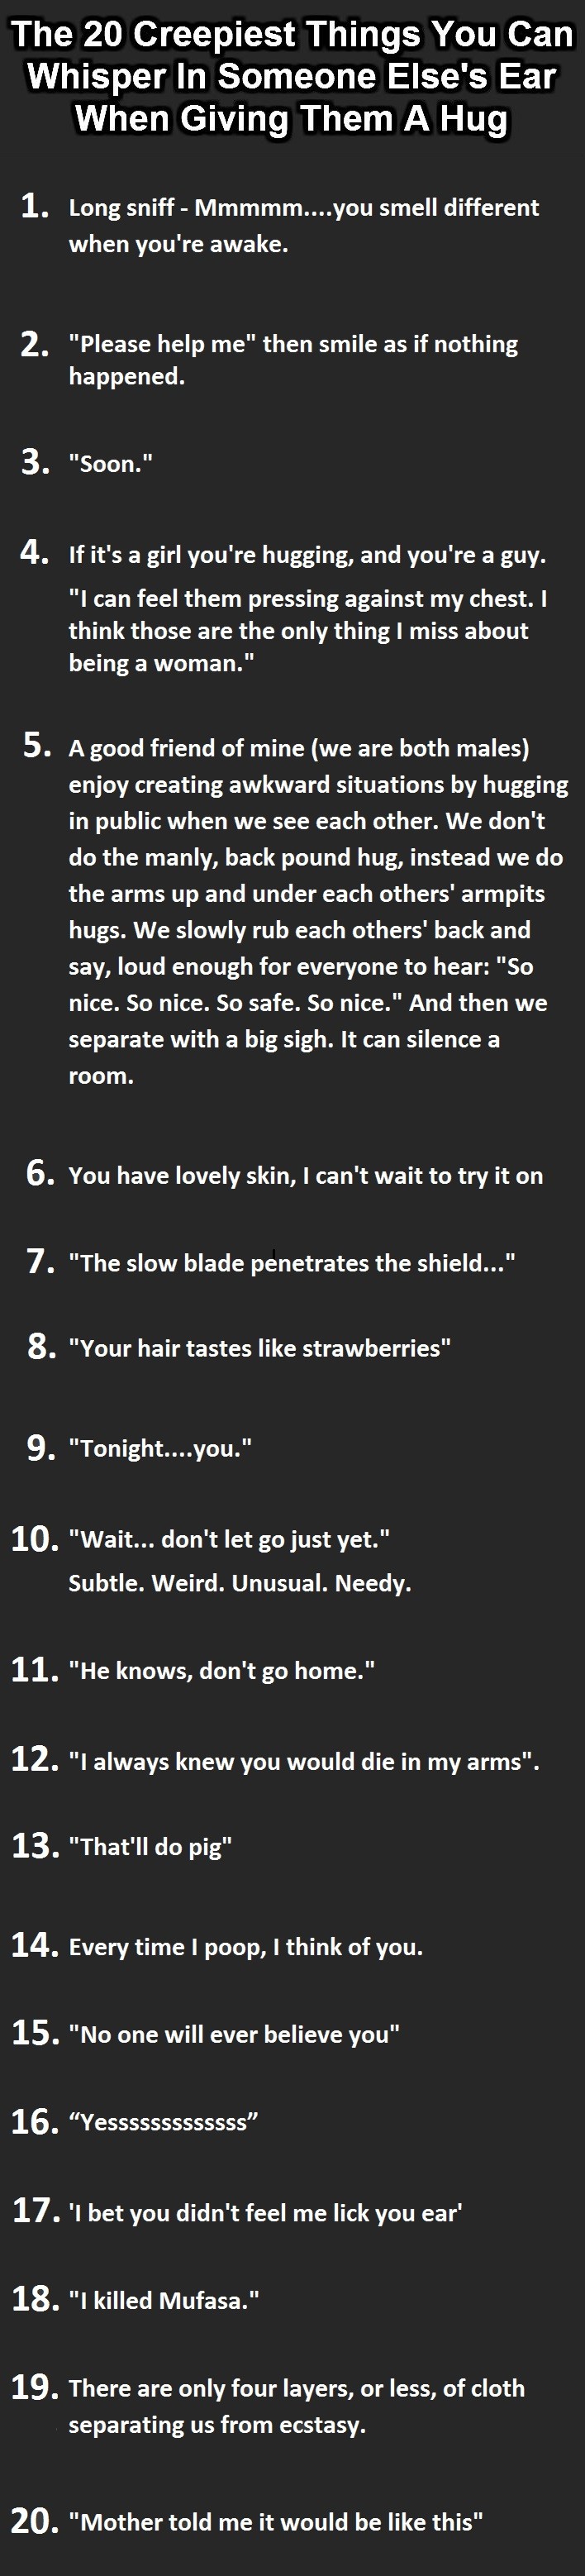 the 20 creepiest things you can whisper in someone else's ear when giving them a hug